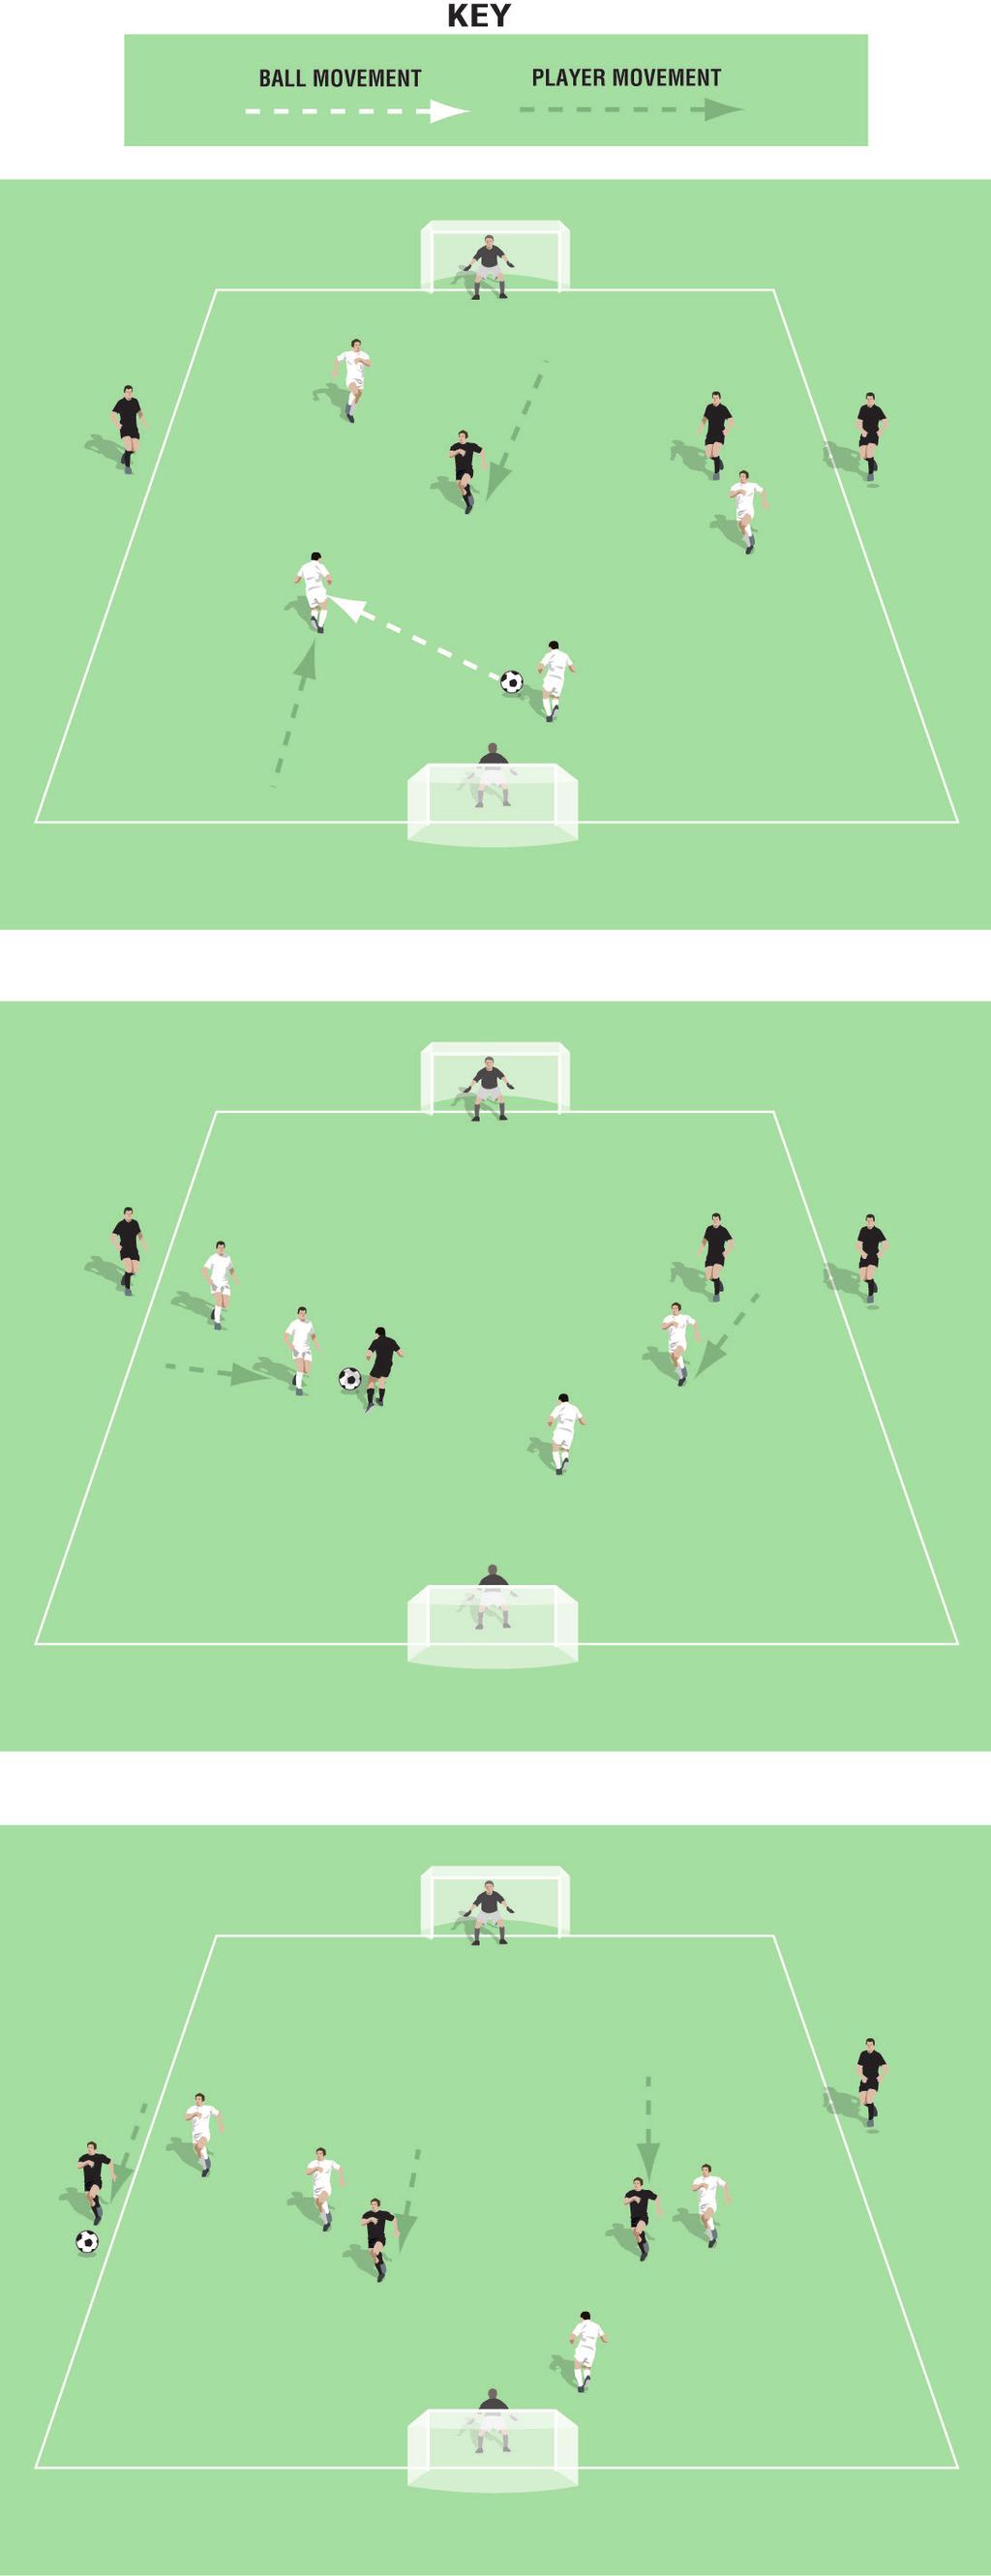 Midde or Wide Advantage Pitch size: 0 x 0 yards (minimum) up to 40 x 5 yards (maximum) Two keepers Two teams of four payers One team pay with a four payers on the pitch The other team pay with two